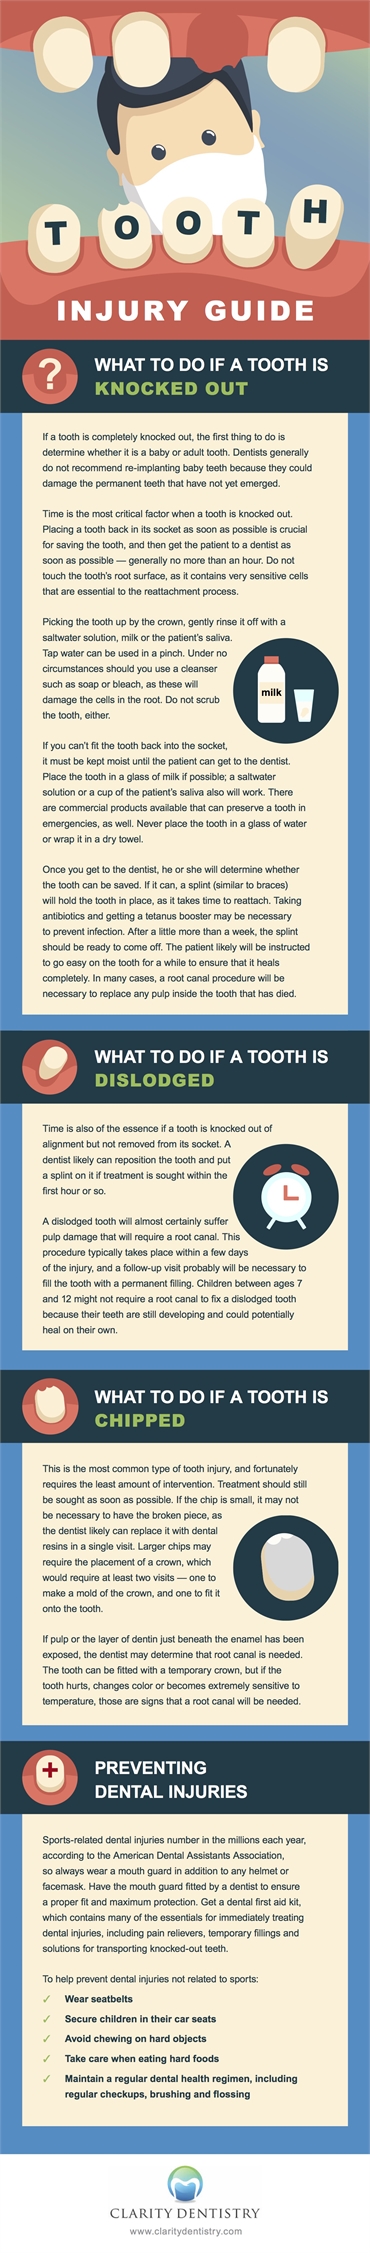 Tooth Injury Guide